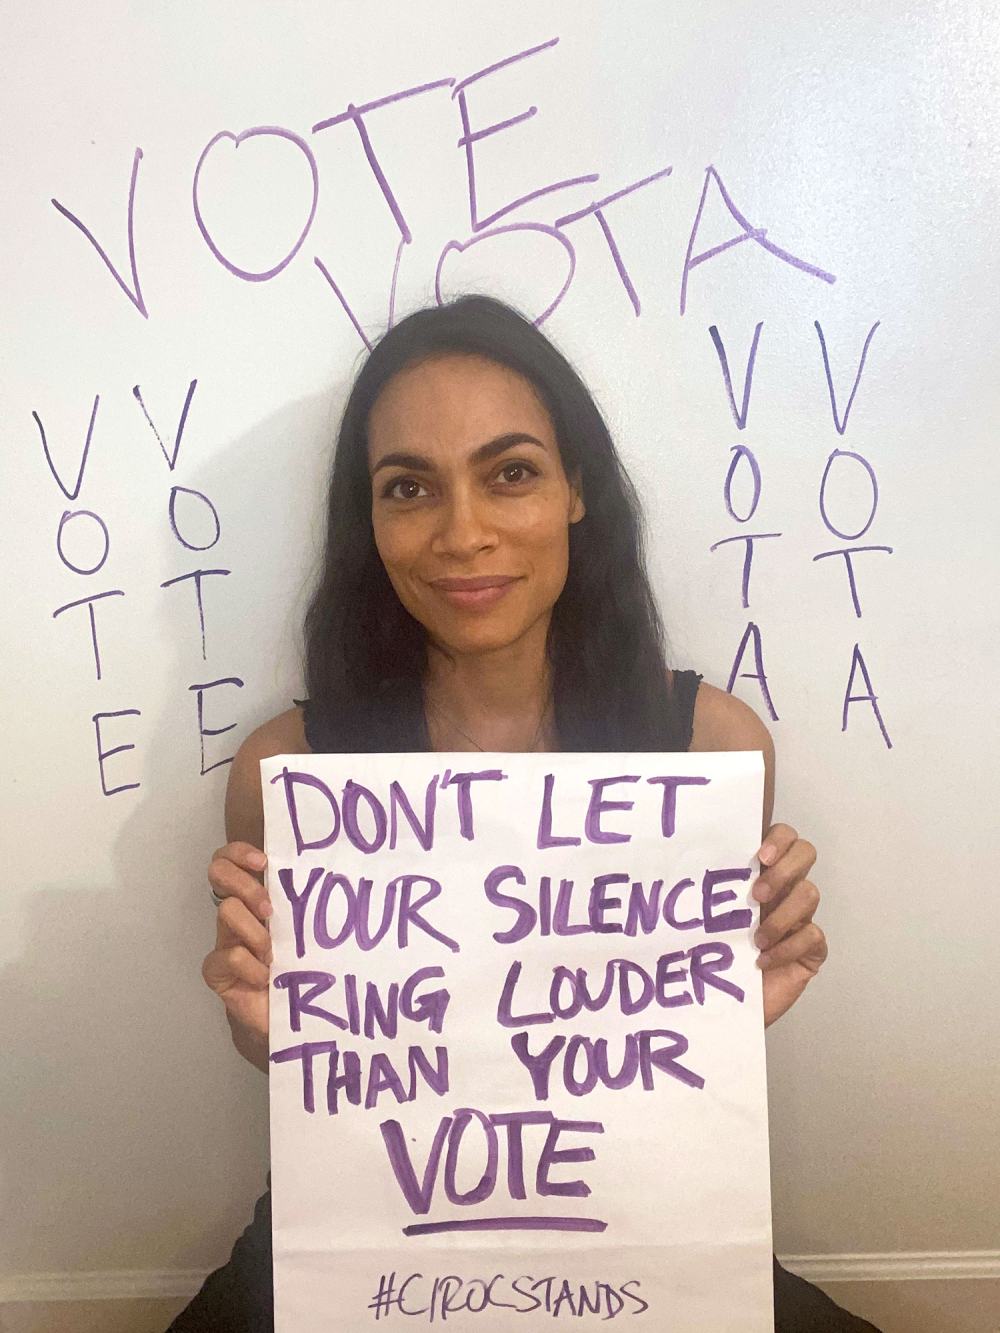 Rosario Dawson joined #CÎROCStands to encourage voters to exercise their most important right this election season.